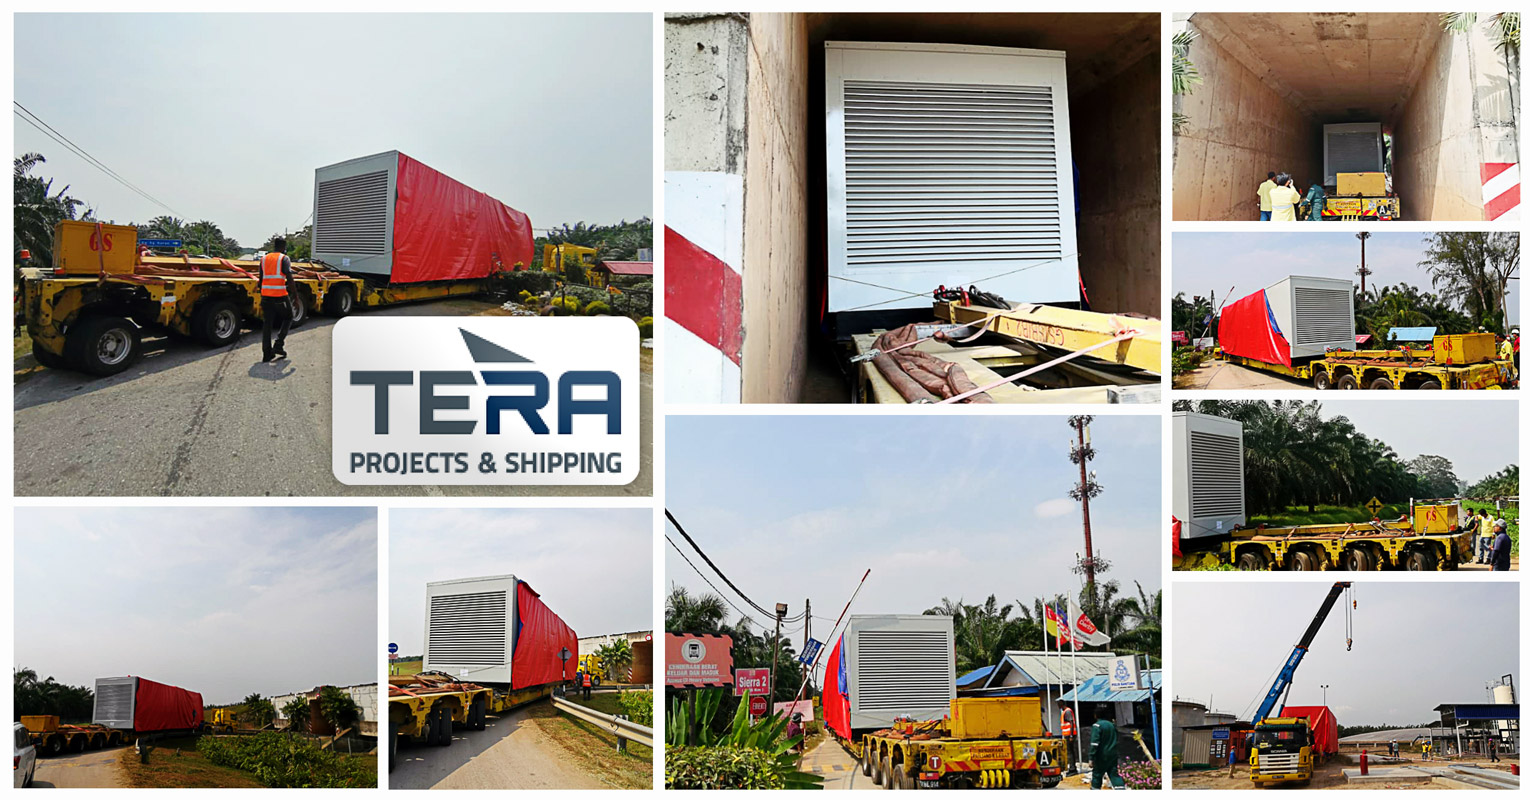 Tera Projects Handled the Transport of Oversized Cargo Around Sharp Corners and a Tight Underpass using their Own Vessel Bridge Low Loader